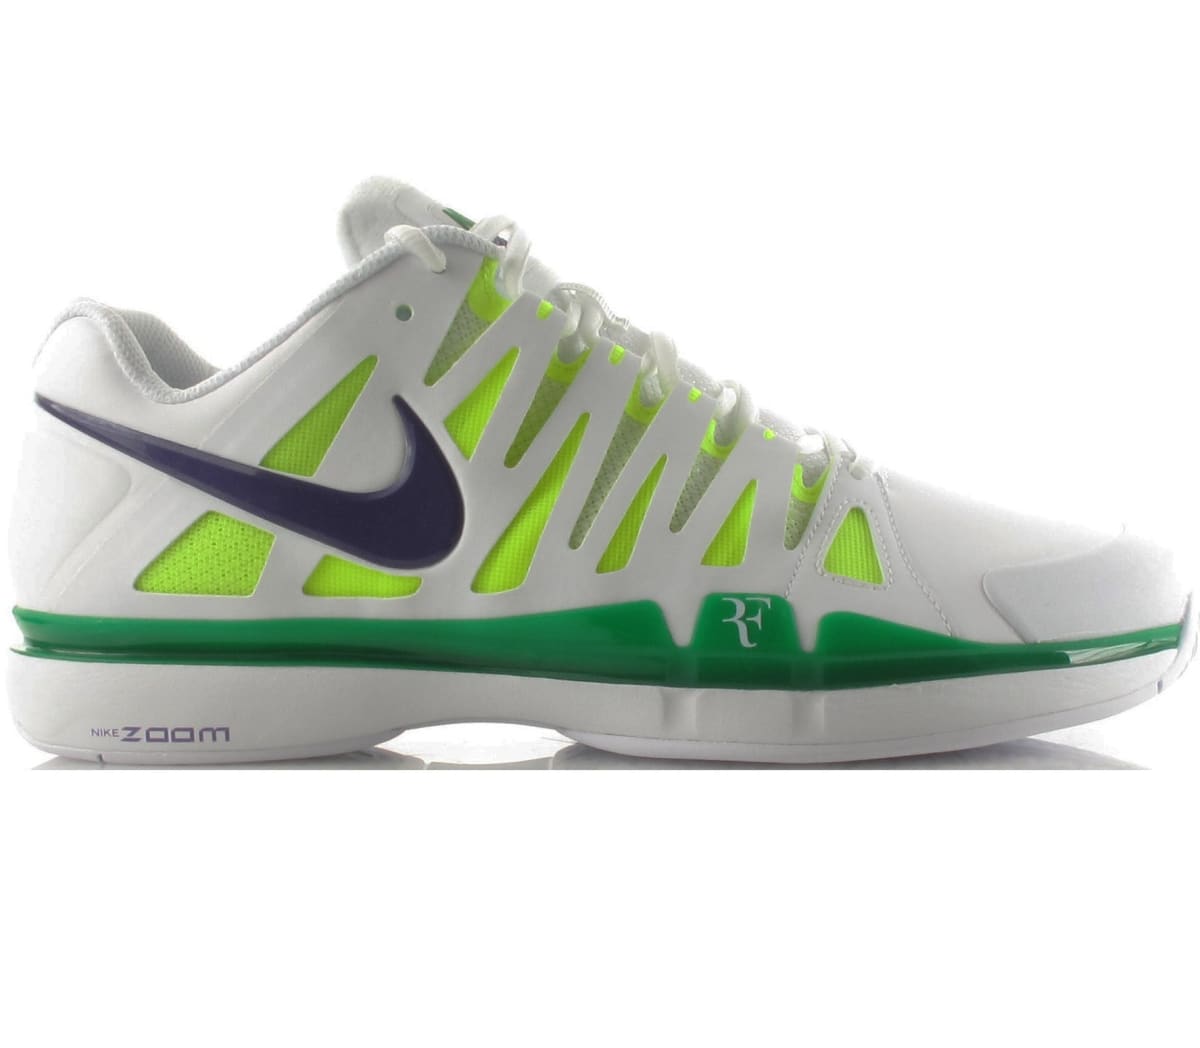 Nike Zoom Vapor 9 | Nike | Sneaker News, Launches, Release Dates, Collabs & Info